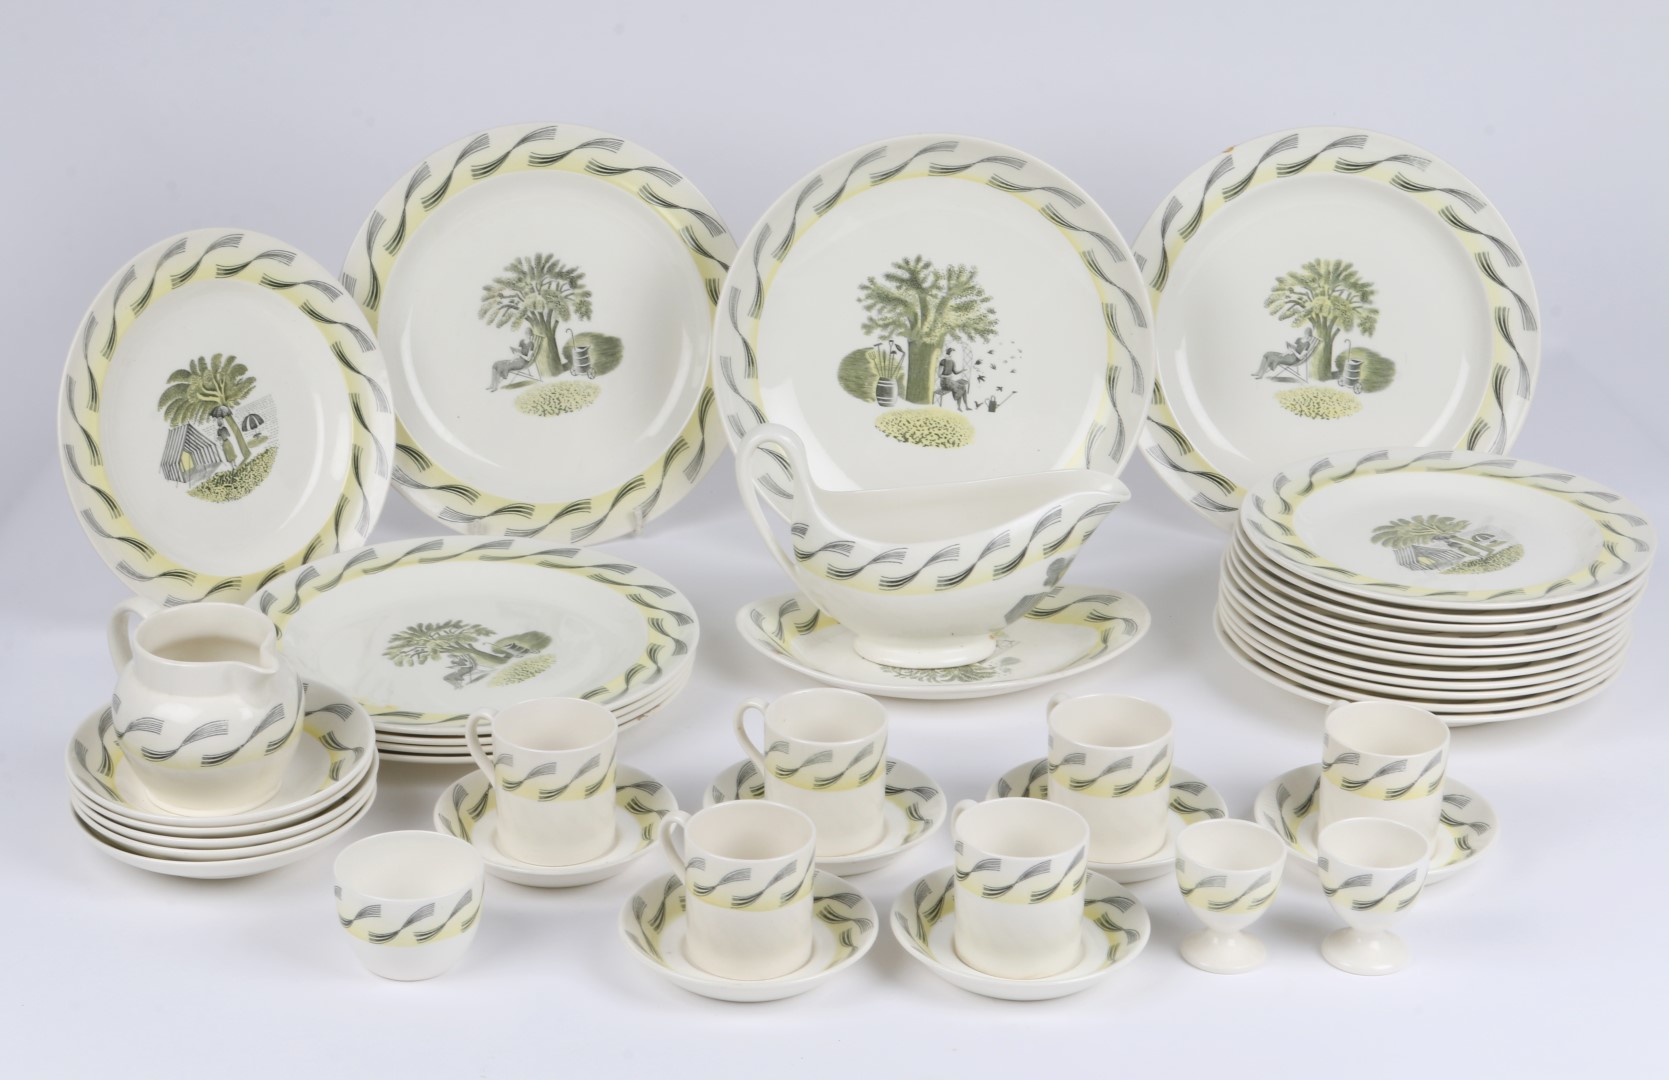 Eric Ravilious (British, 1903-1942) for Wedgwood 'Garden' pattern breakfast and dinner service